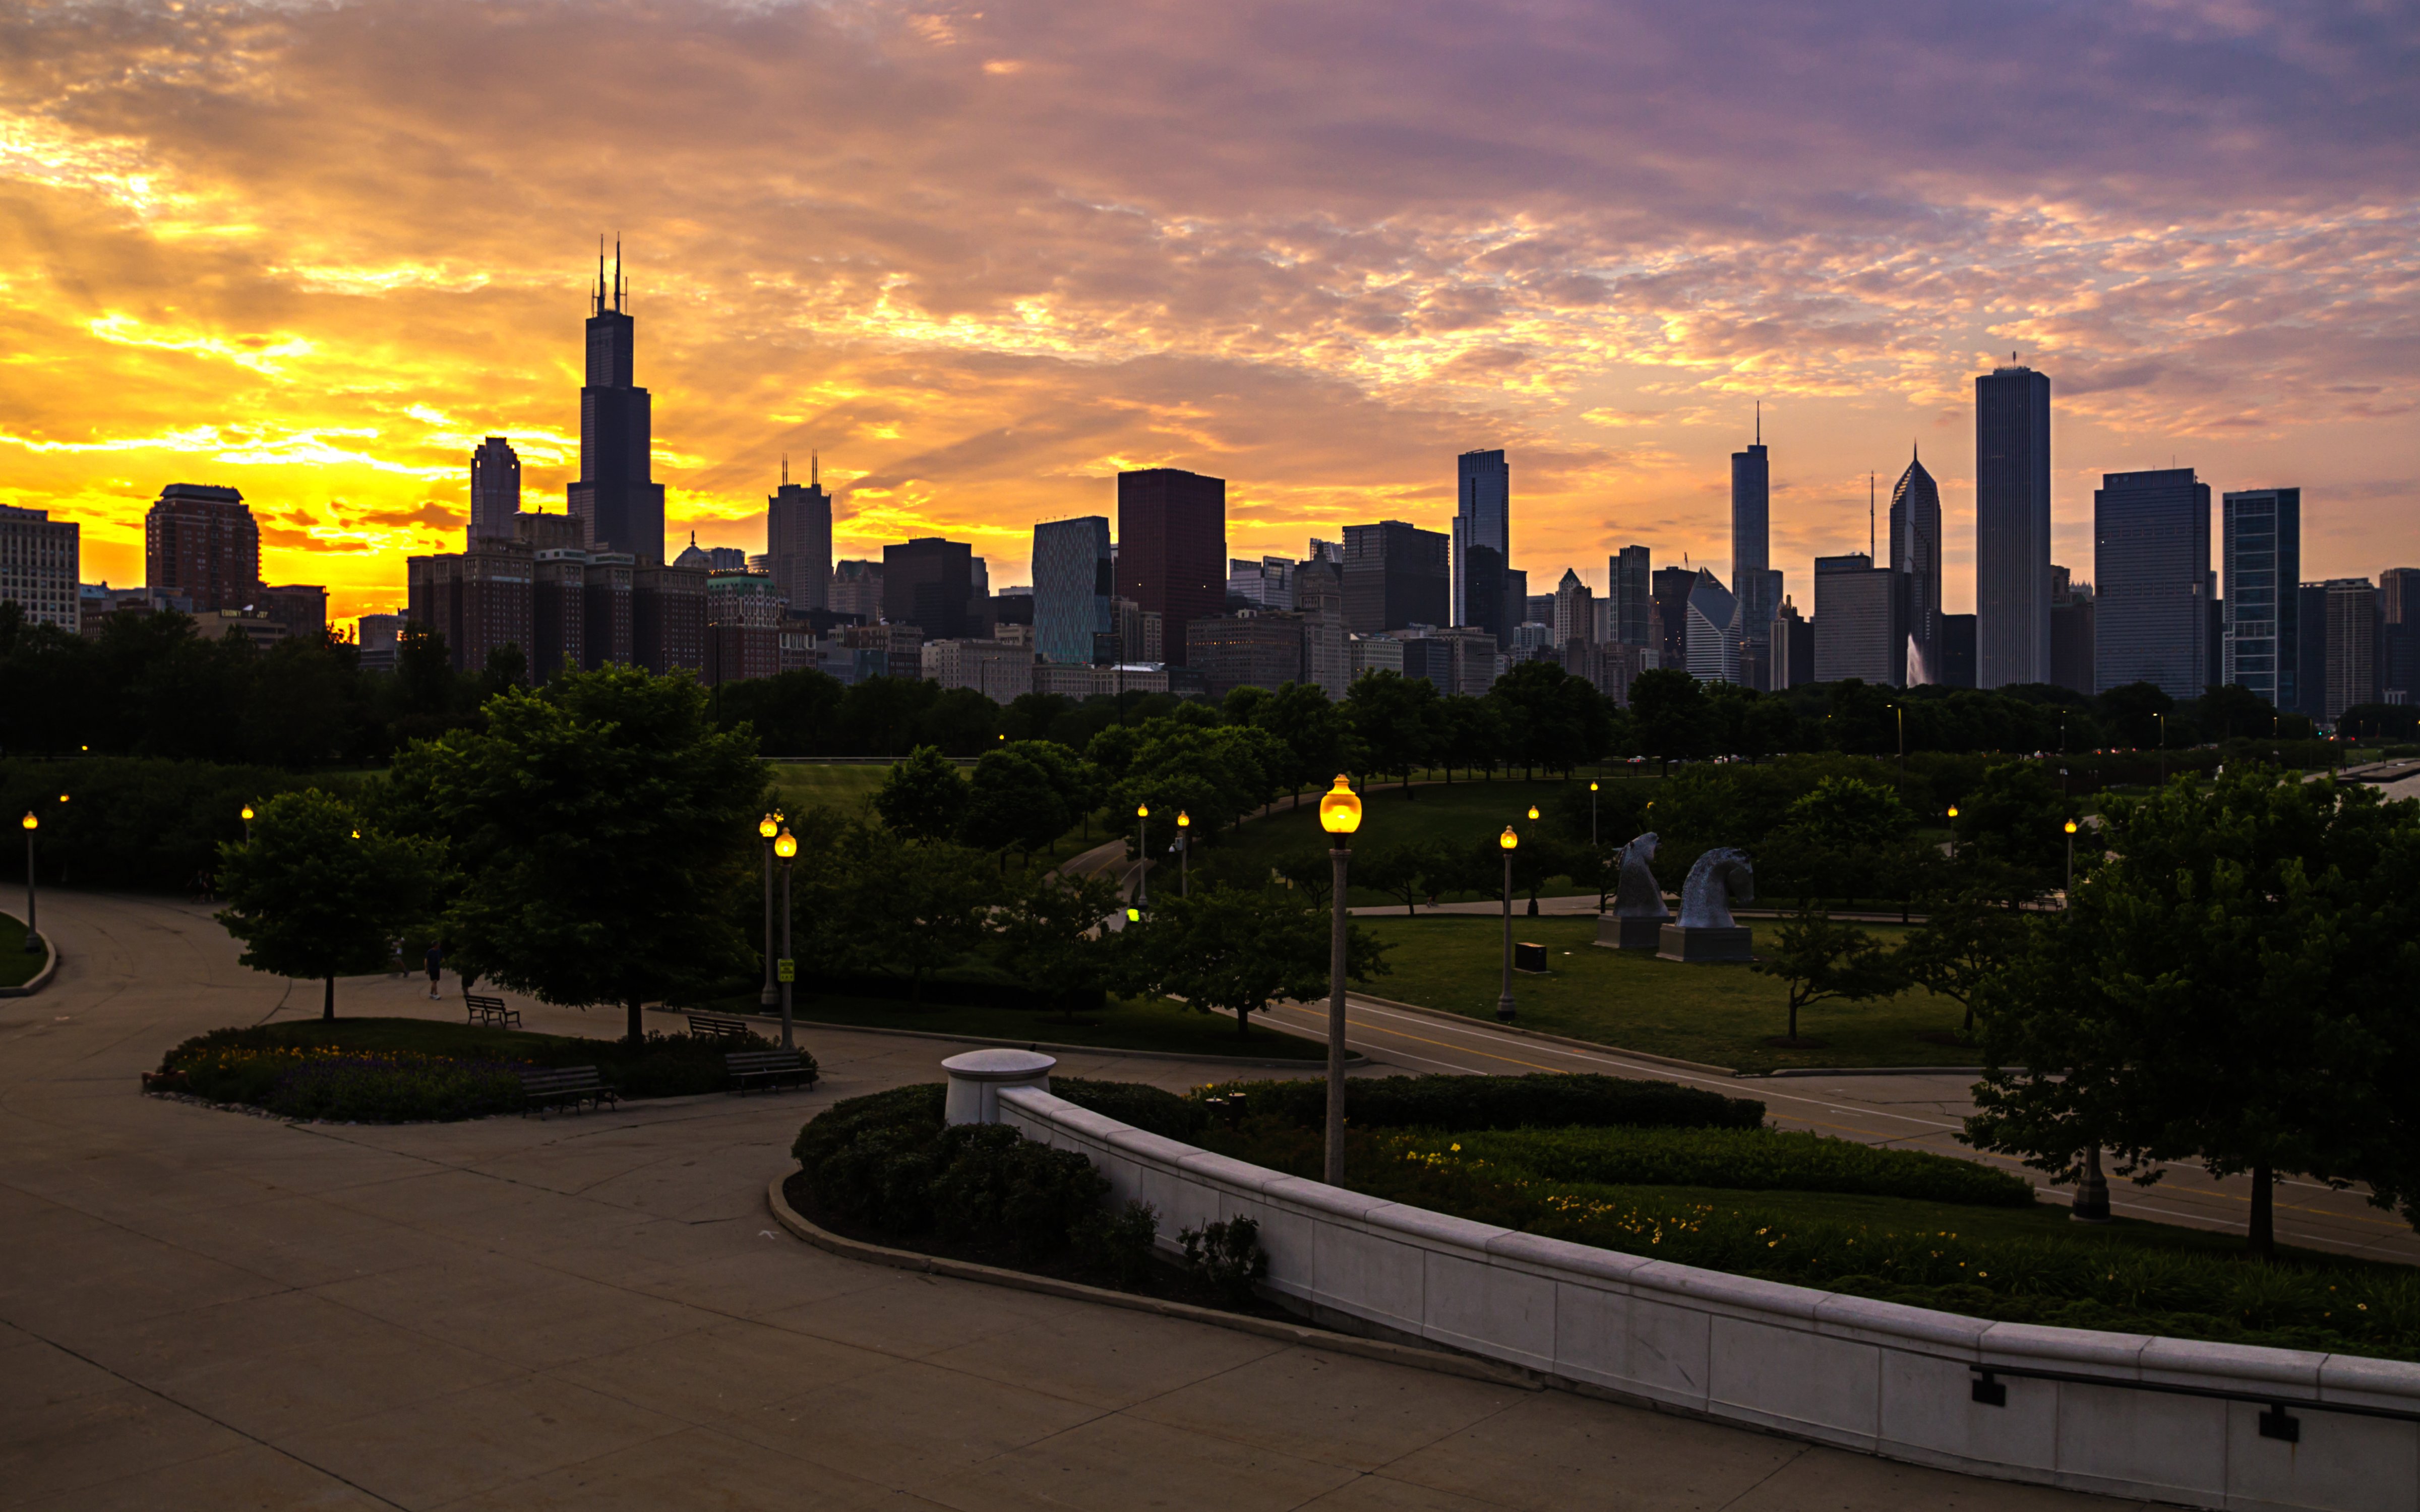 Sunset silhouette the Willis Tower and Chicago skyline, viewed from the museum campus. (Carl Larson—Flickr Vision)